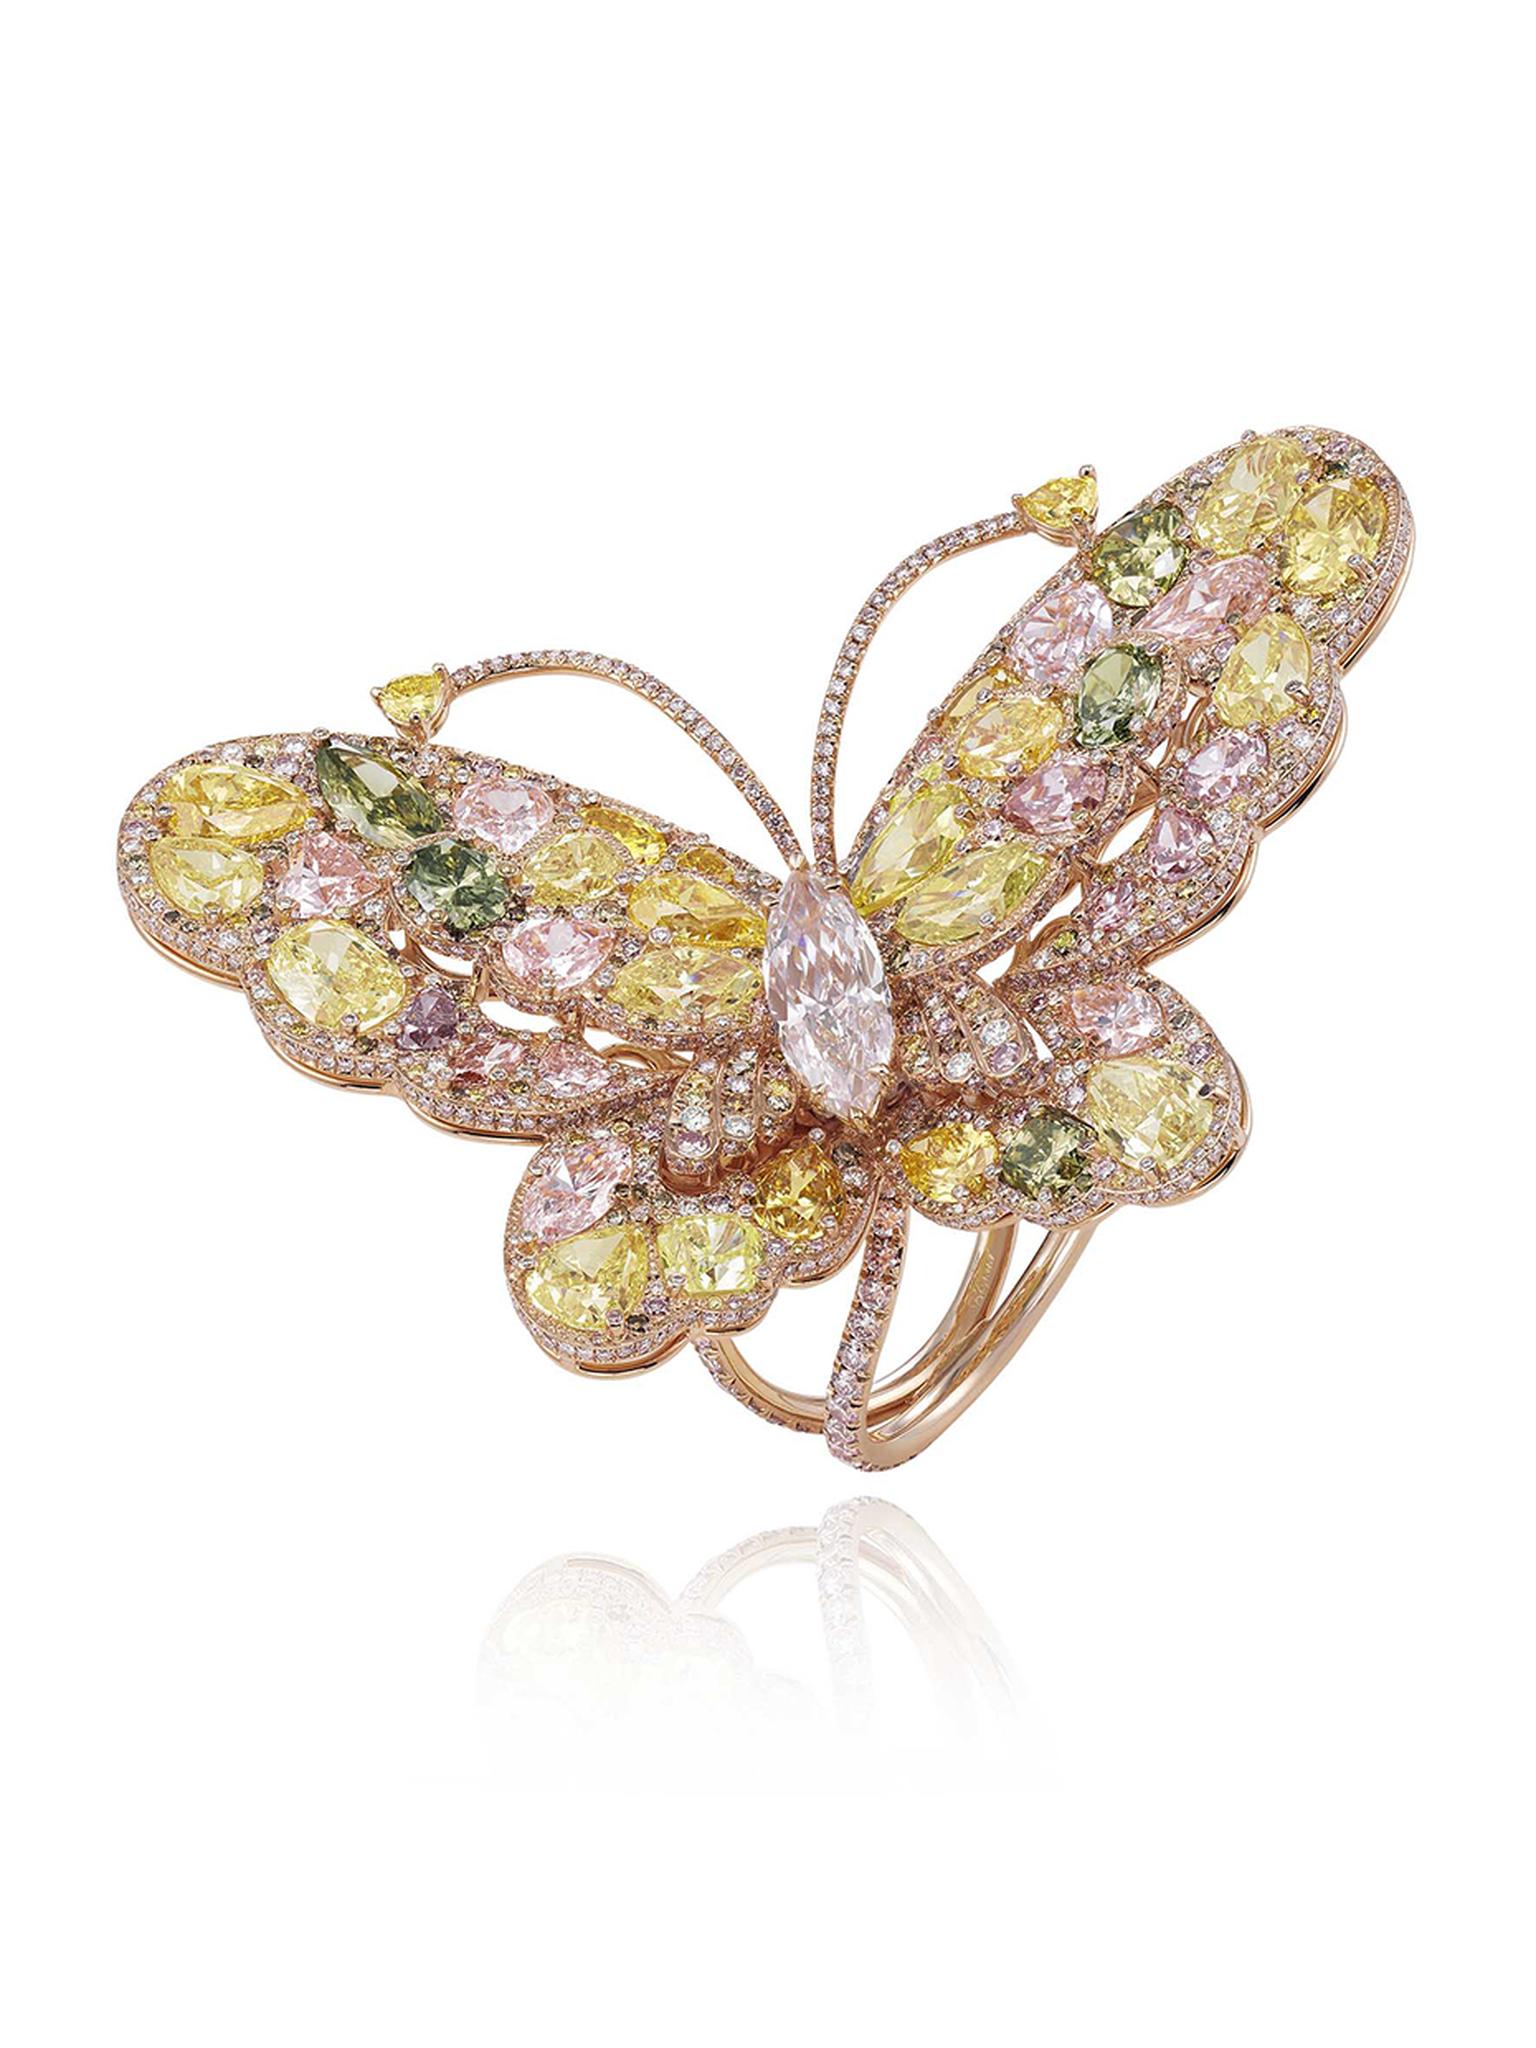 Chopard 2014 Red Carpet Collection rose gold butterfly ring featuring pink, yellow and white diamonds.